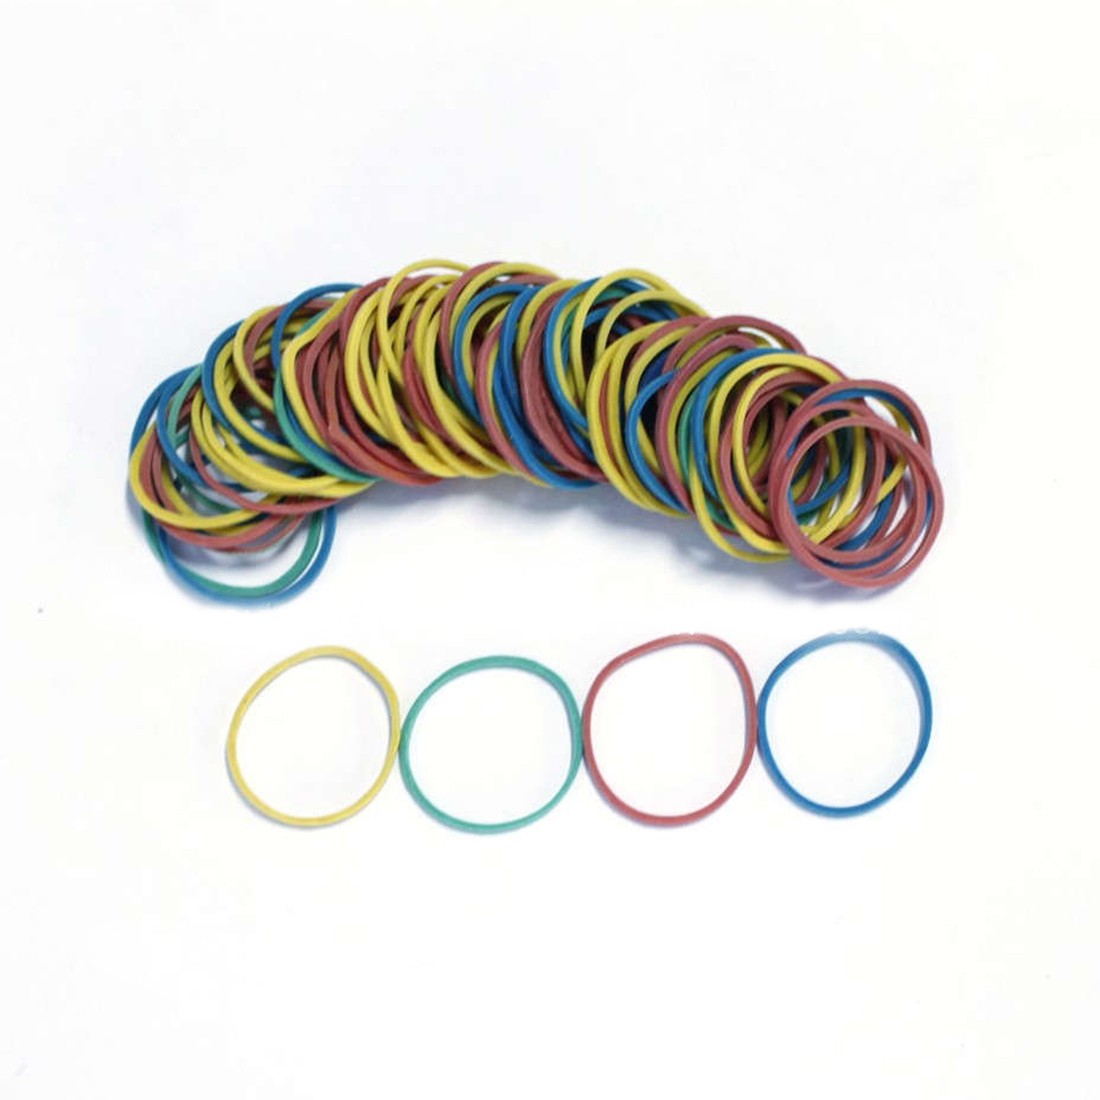 Rubber Bands 1 inch 500 gms